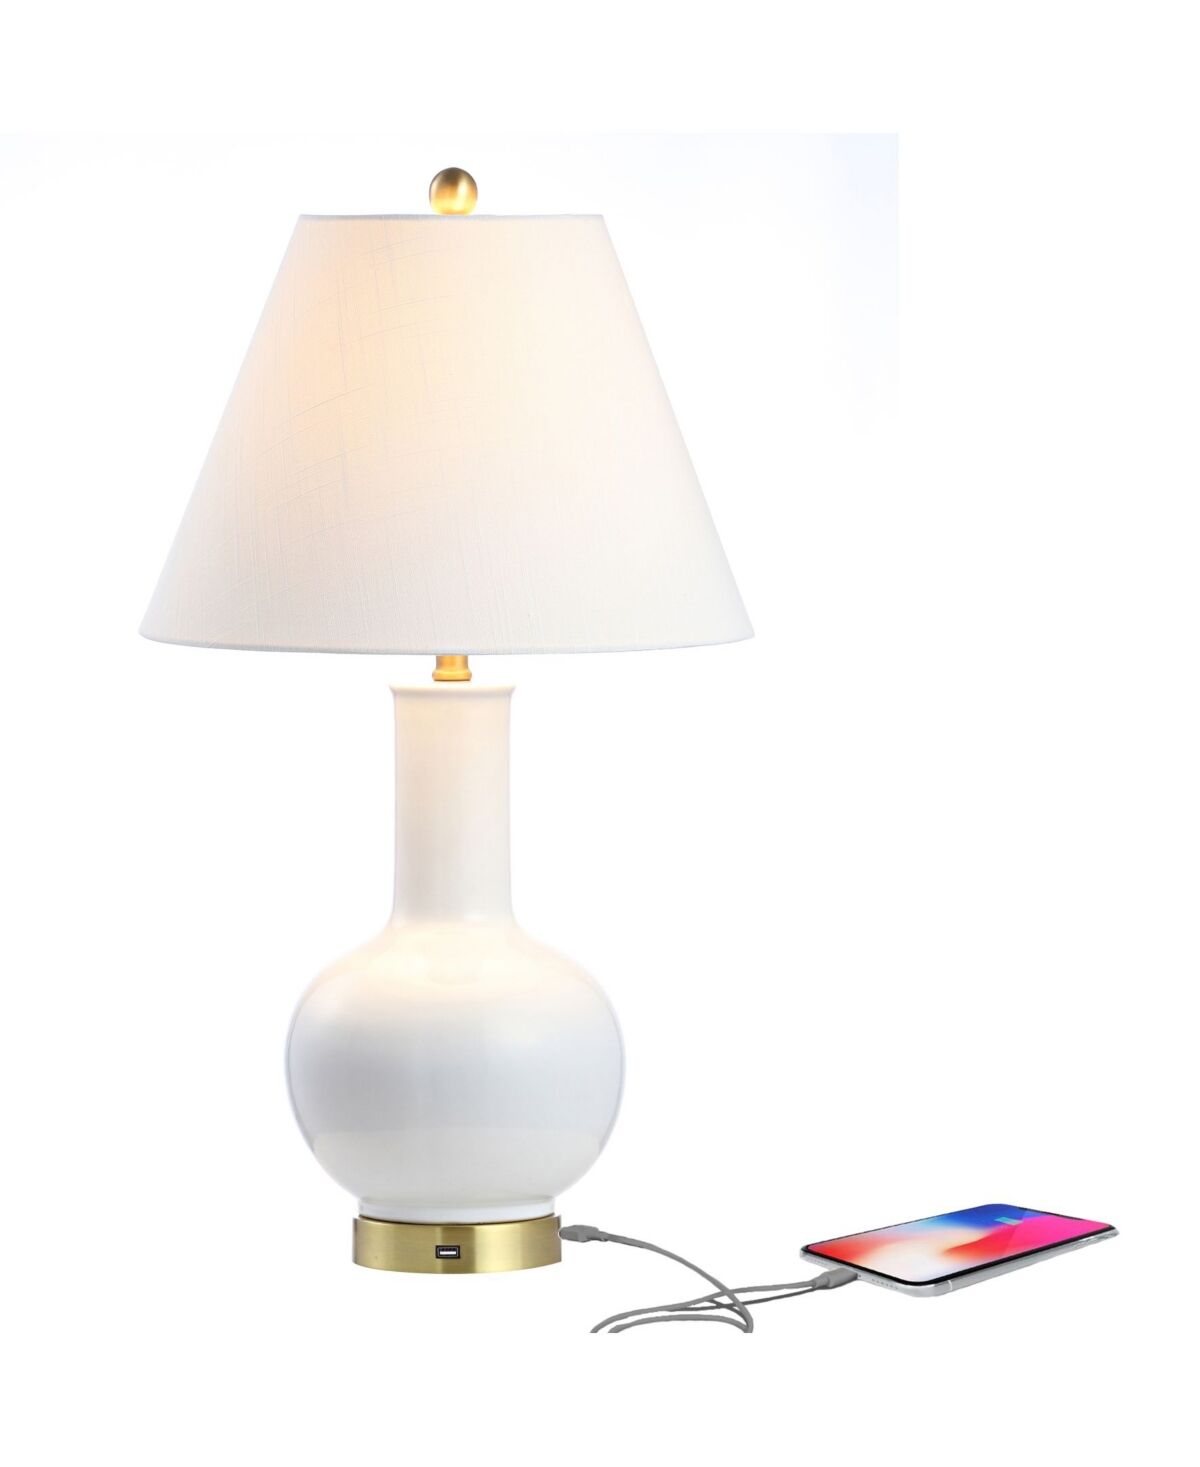 Jonathan Y Han Ceramic iron Contemporary Usb Charging Led Table Lamp - White/brass gold